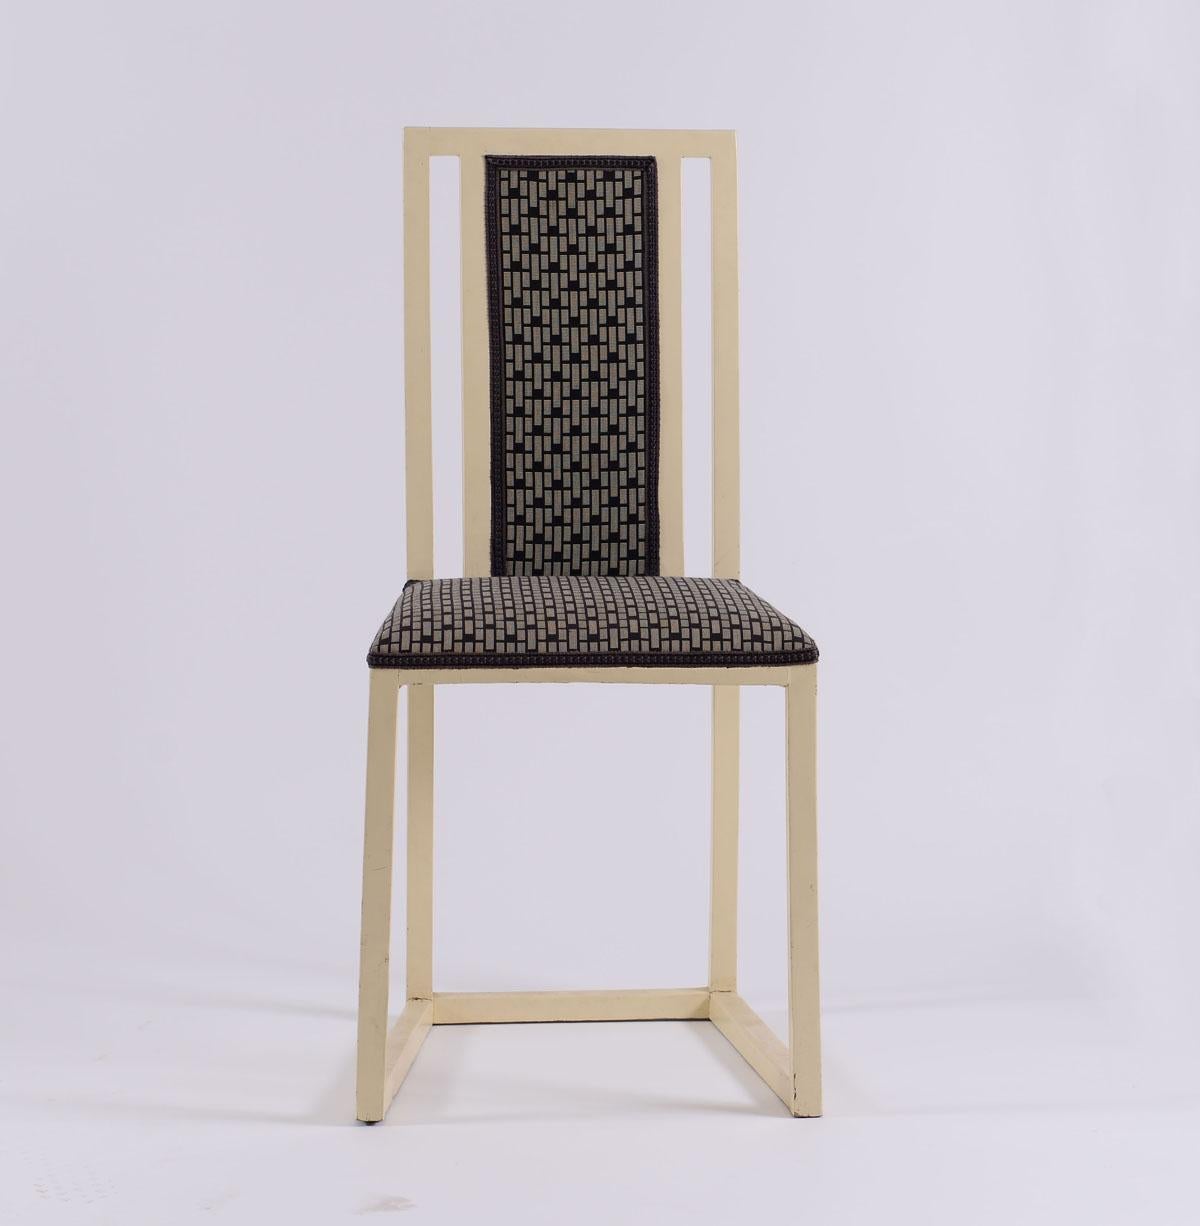 A very rare chair from the early stages of the Wiener Werkstätte. Variations were displayed at the Neustiftgasse showrooms of the Werkstatte and were also placed at the Brauner Mansion at the Hohe Warte in Vienna. Seat height 45cm, white lacquered